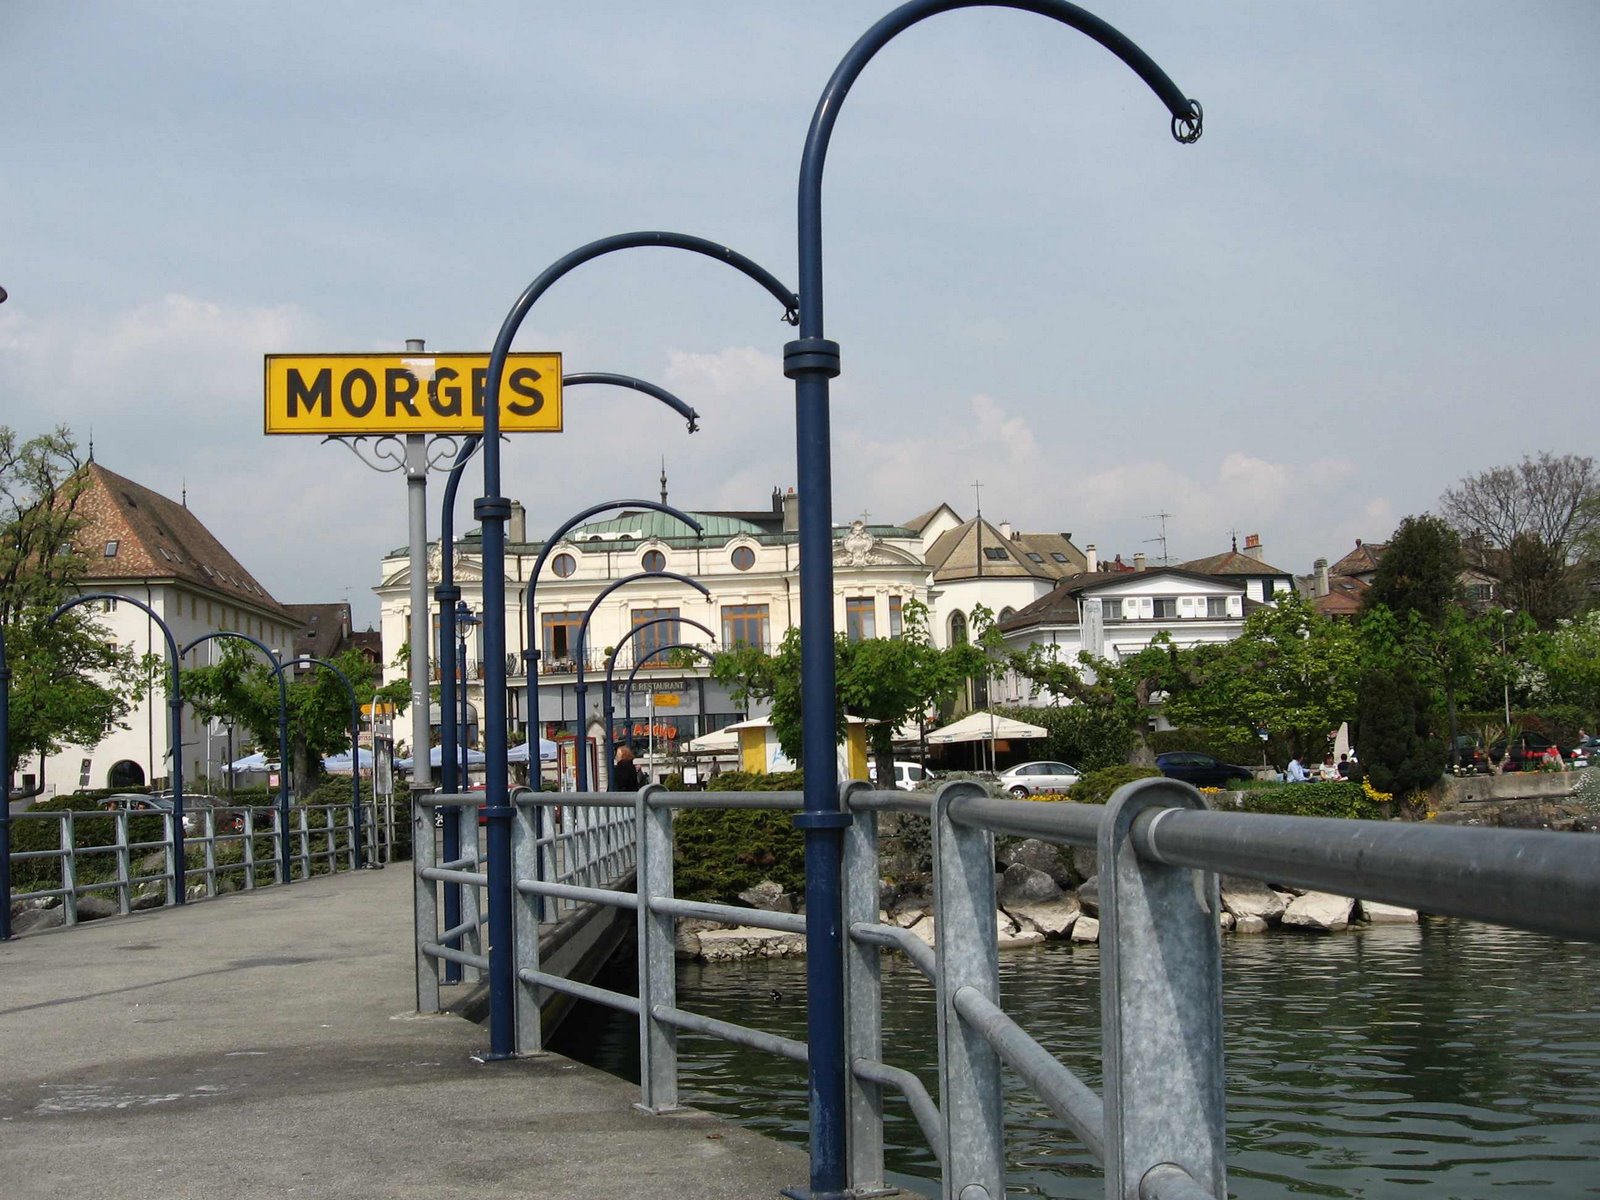 [Morges_sign.jpg]